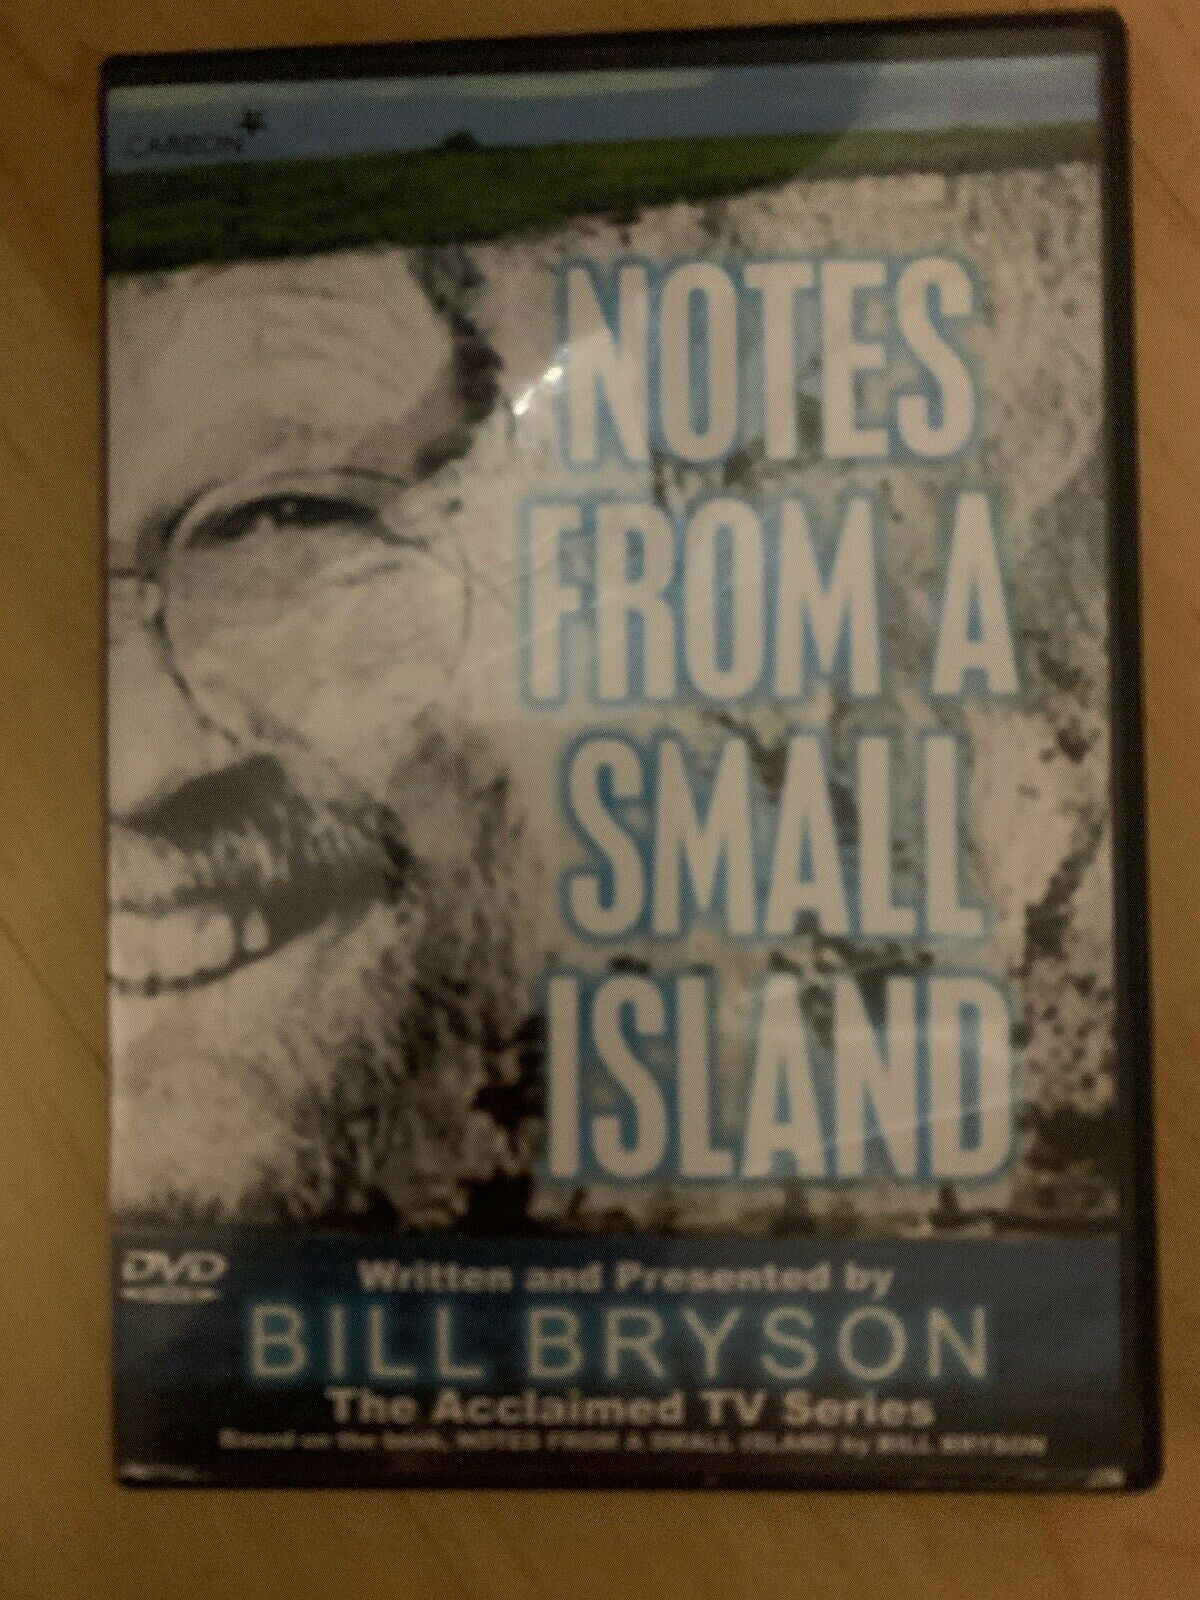 Notes From A Small Island Written And Presented By Bill Bryson (DVD, 2001)